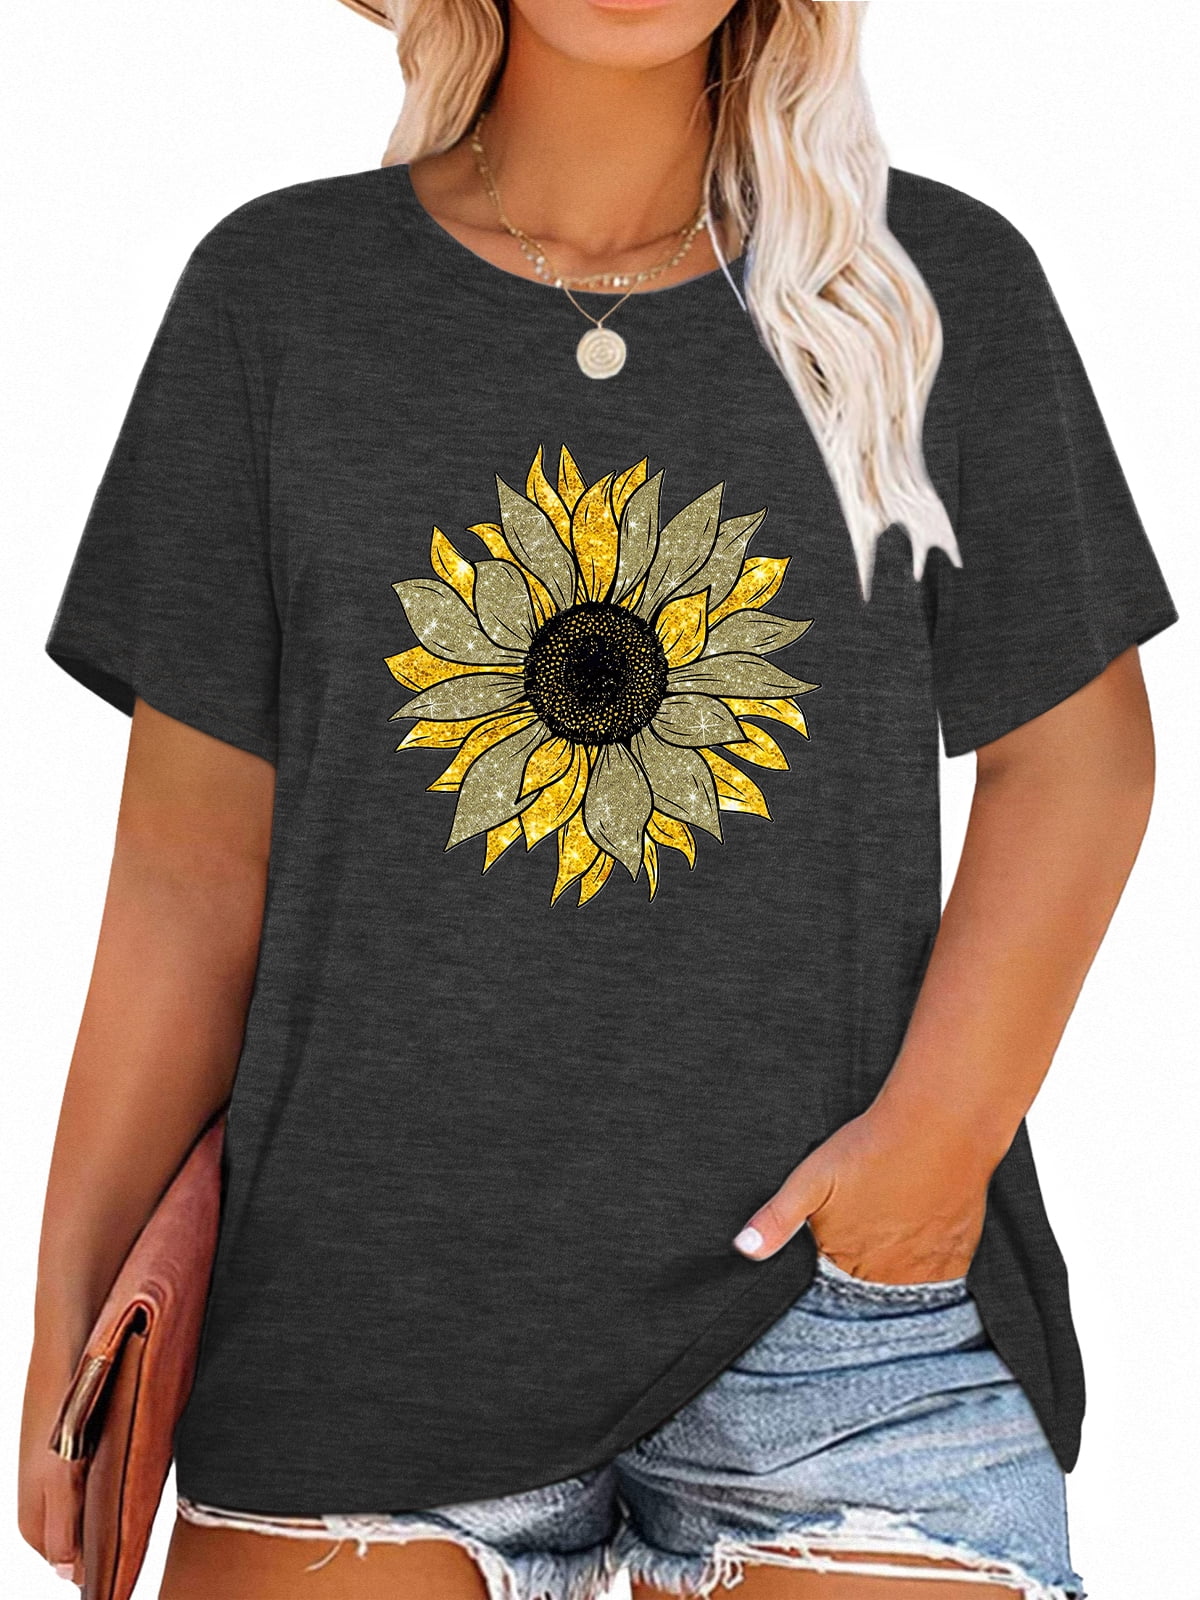 Anbech Sunflower Plus Size T-Shirts for Women Graphic Sunflowers Print ...